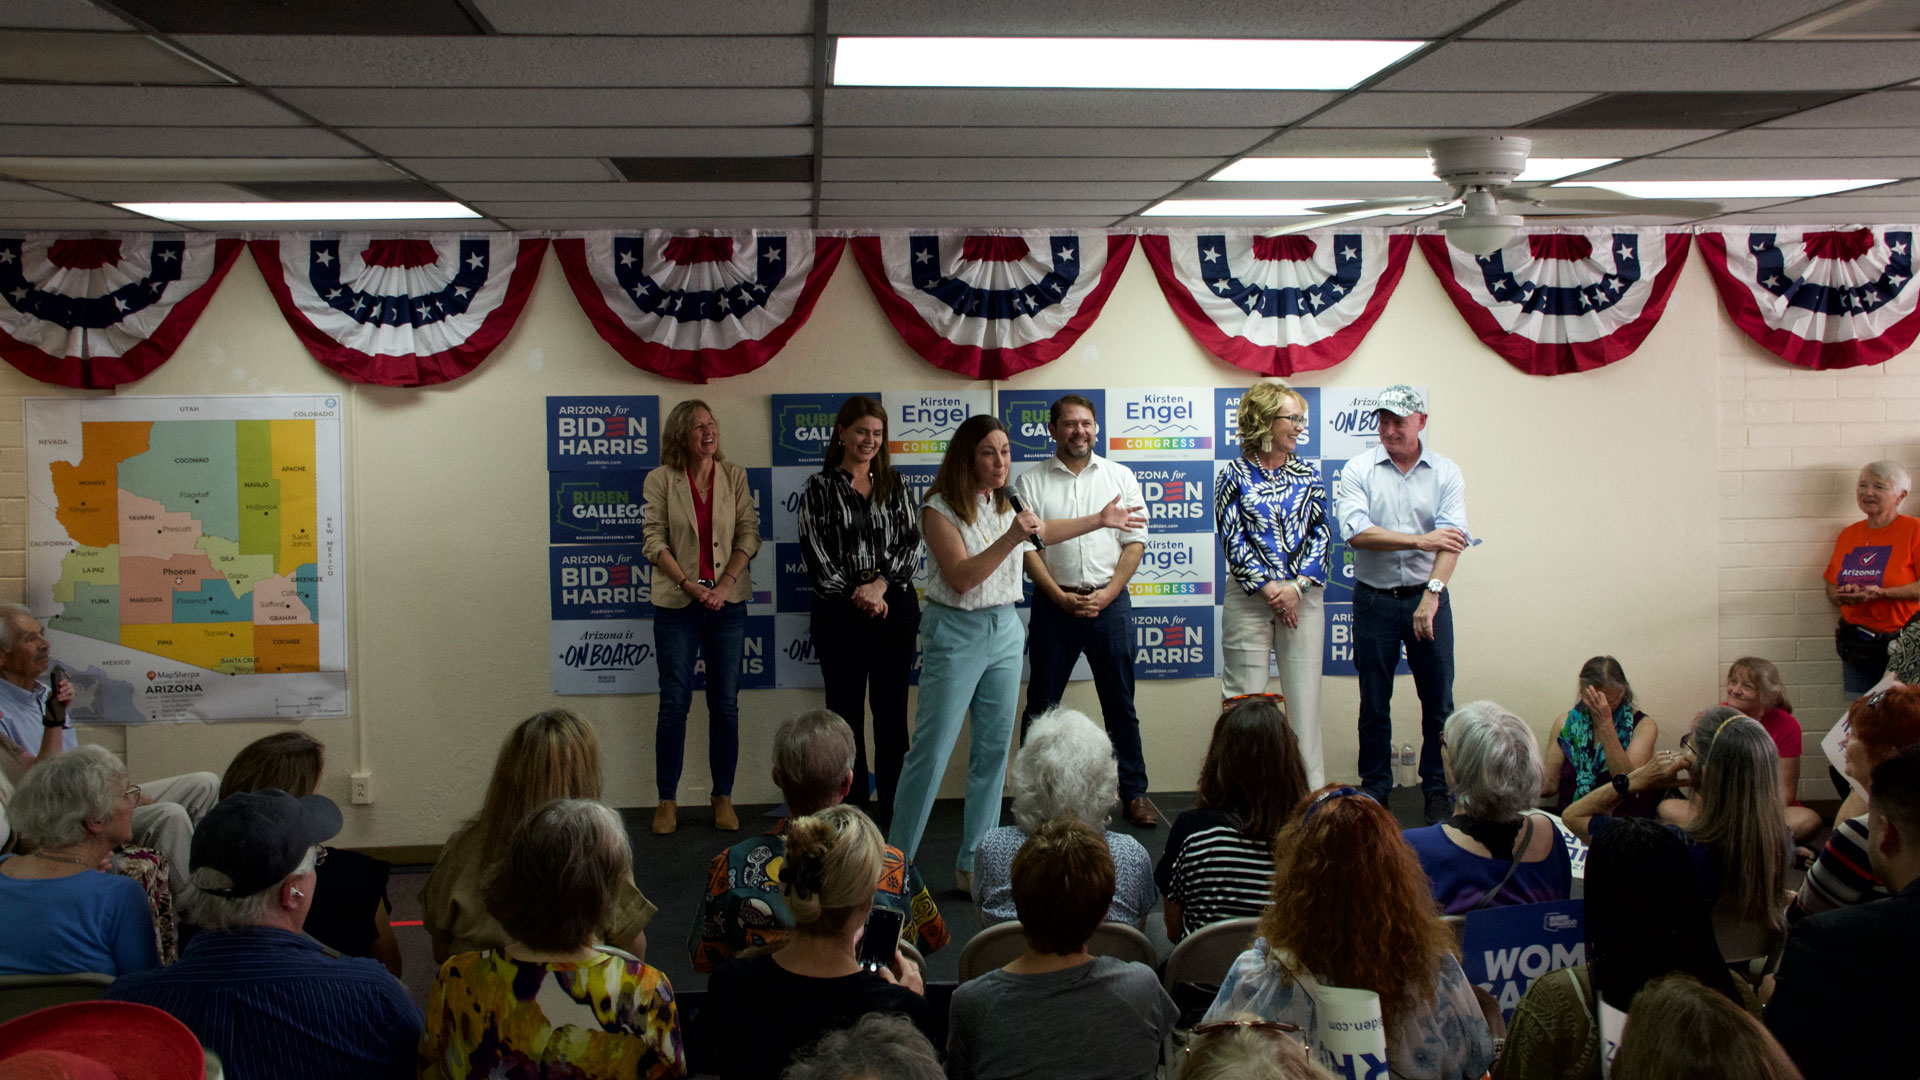 The Democratic Party opened its new headquarters in Tucson, Arizona, featuring noteworthy guest speakers. From left to right, congressional candidate Kirsten Engel, Tucson Mayor Regina Romero, President of End Citizens United Tiffany Muller, U-S Senate candidate Ruben Gallego, former Congresswoman Gabrielle Giffords, and Senator Mark Kelly.